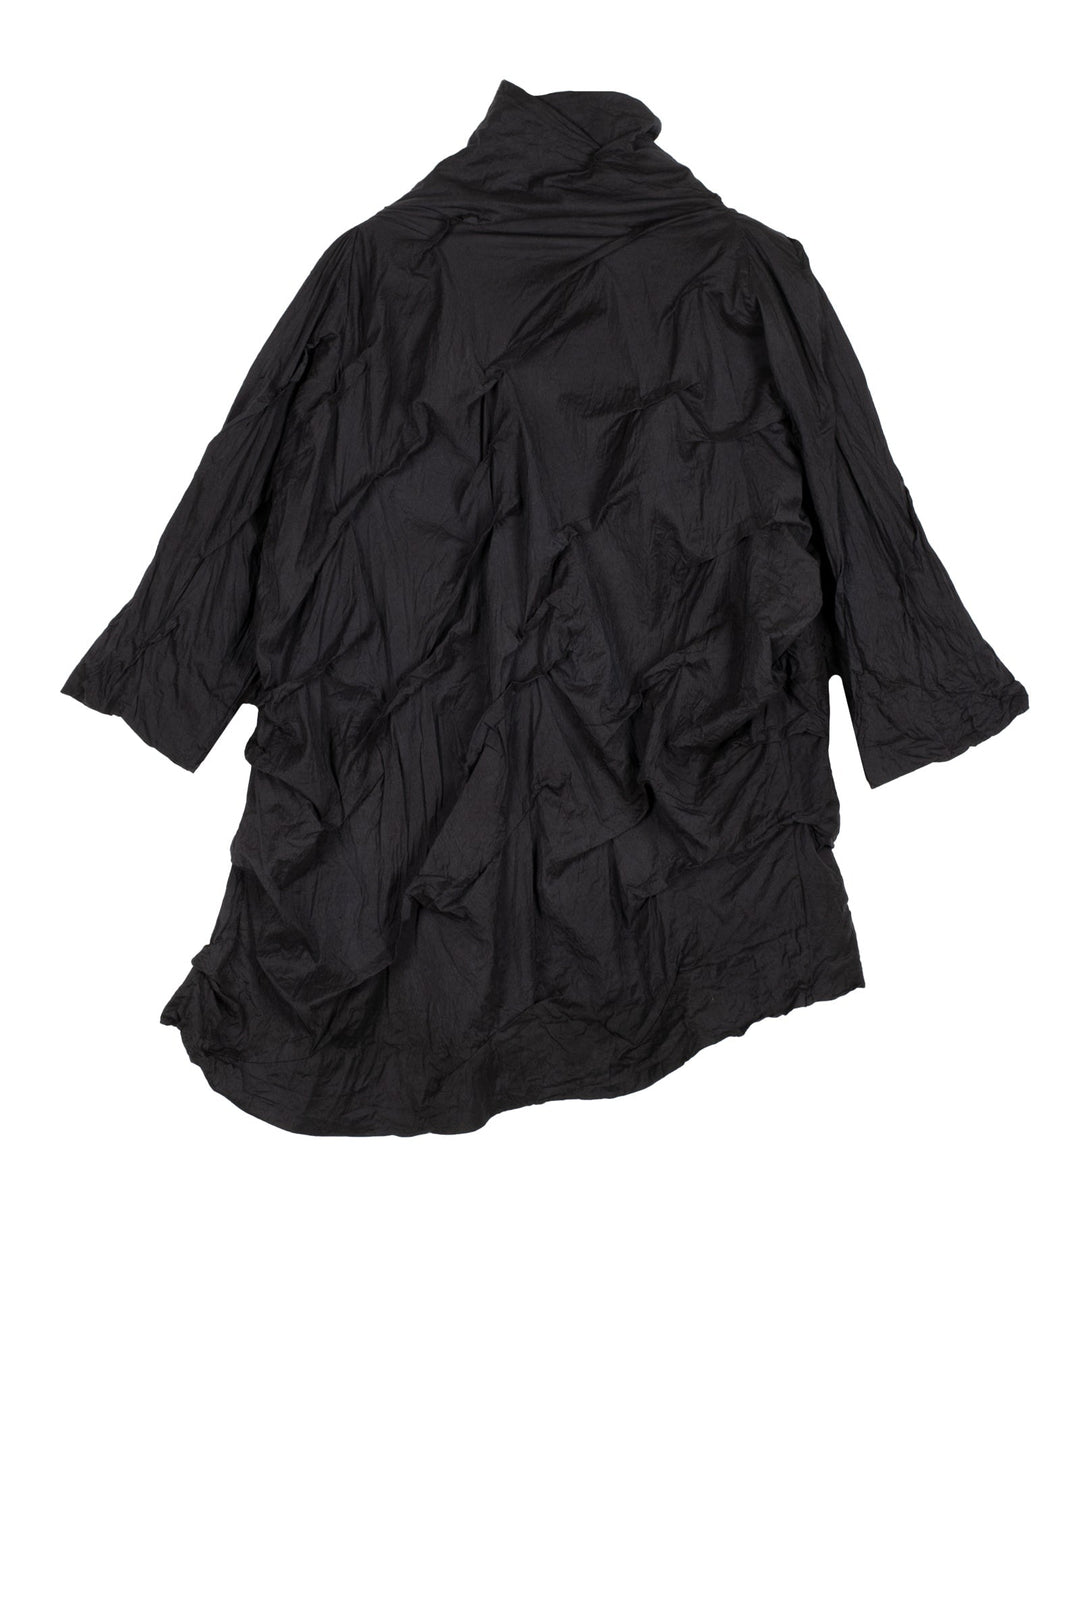 DYED COTTON SILK HEAVY VOILE WAVY TUCK PULLOVER - dh1552-blk -